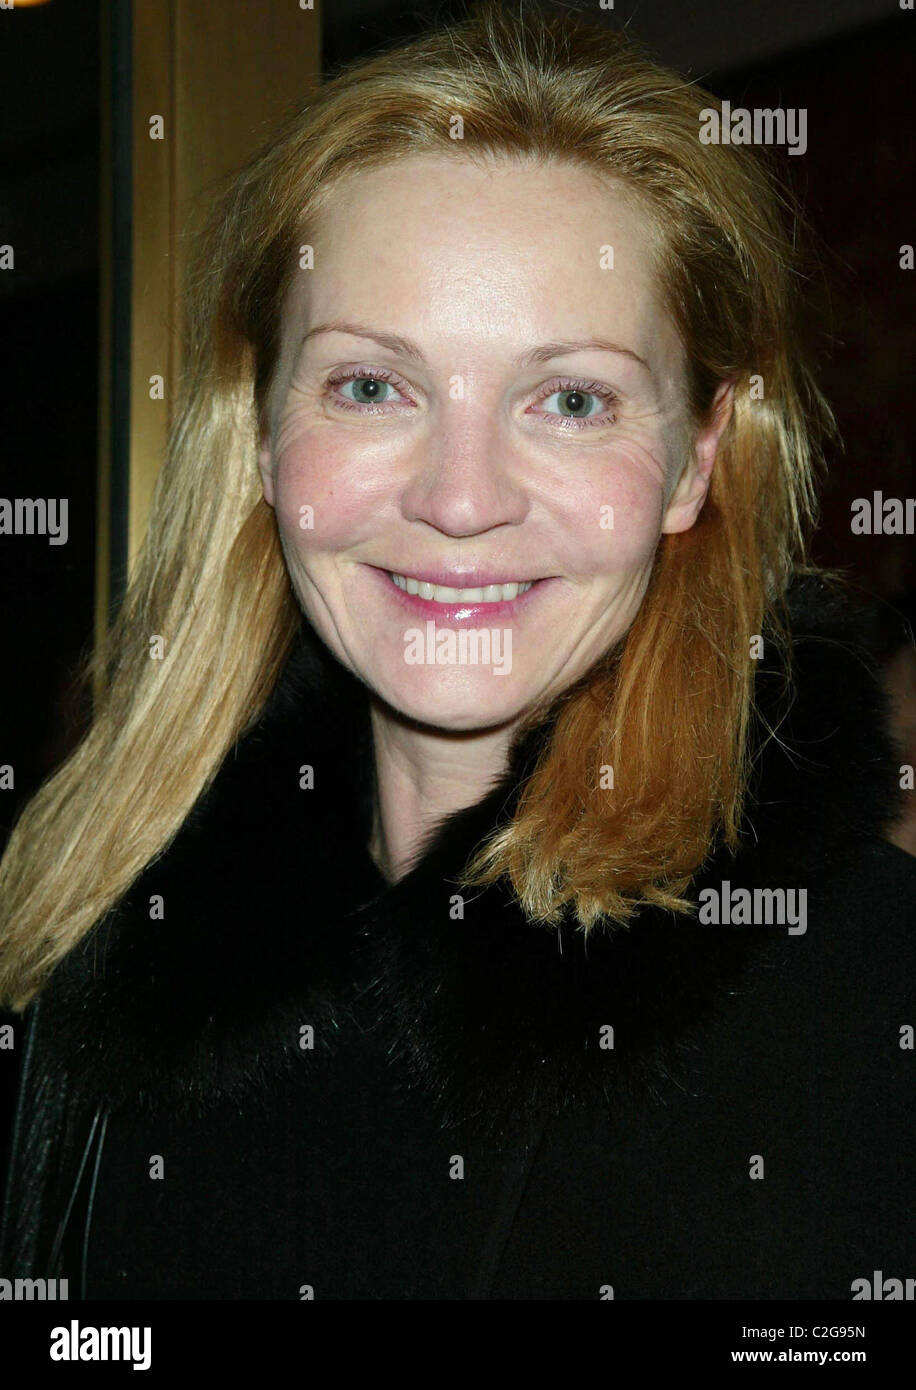 Joan Allen Opening night performance of 'August: Osage County' at the Imperial Theatre - Arrivals New York City, USA - 04.12.07 Stock Photo